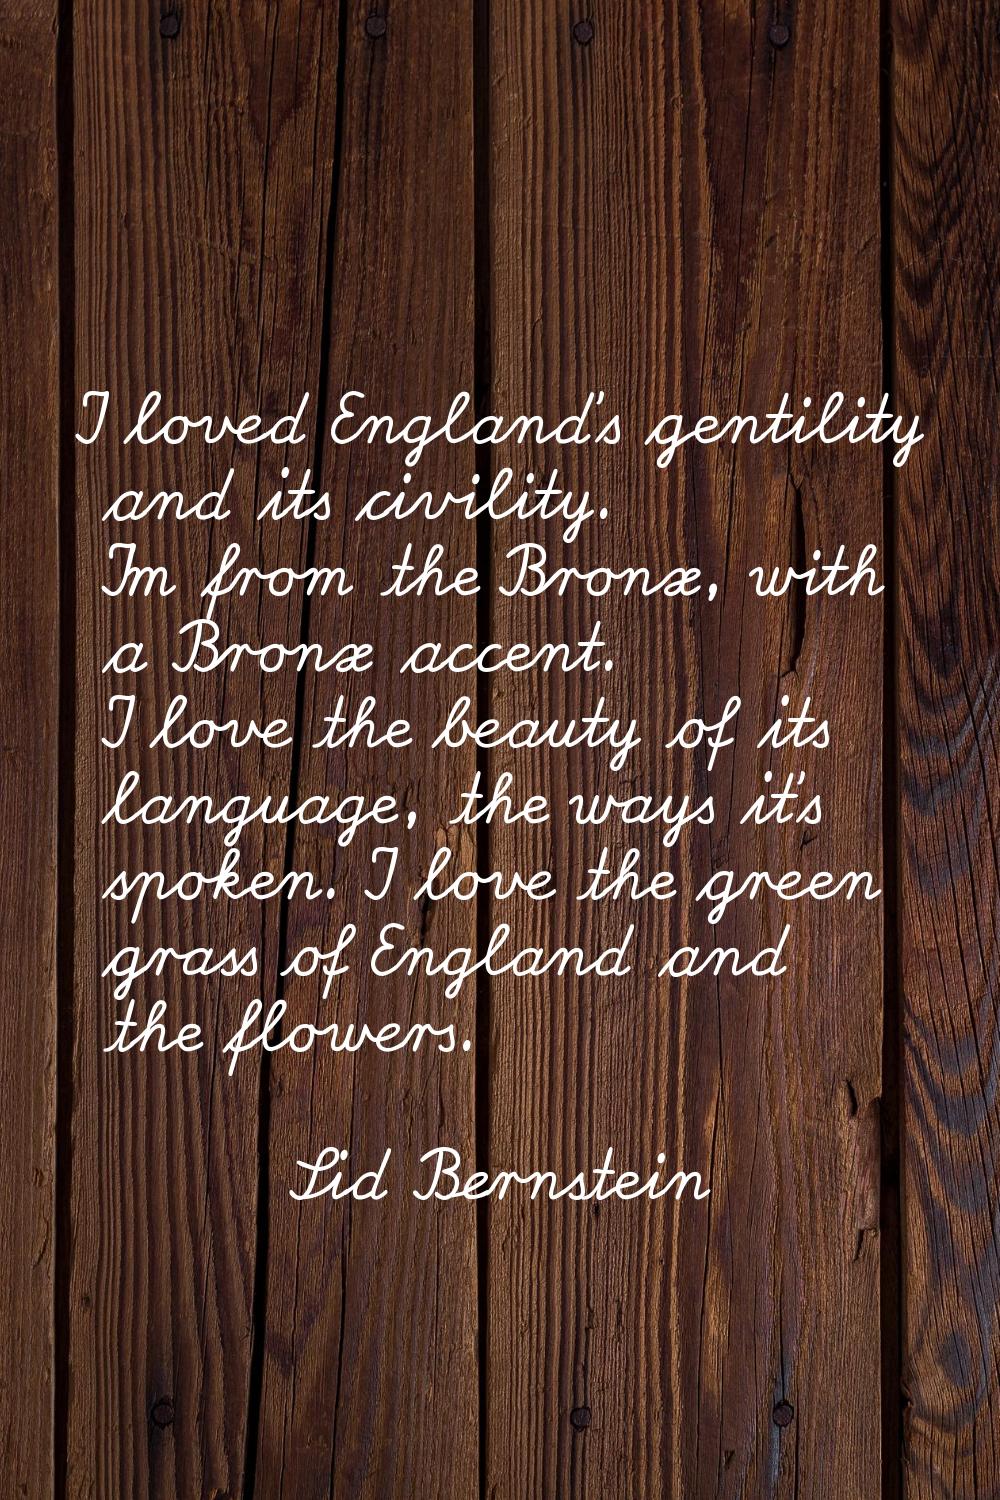 I loved England's gentility and its civility. I'm from the Bronx, with a Bronx accent. I love the b